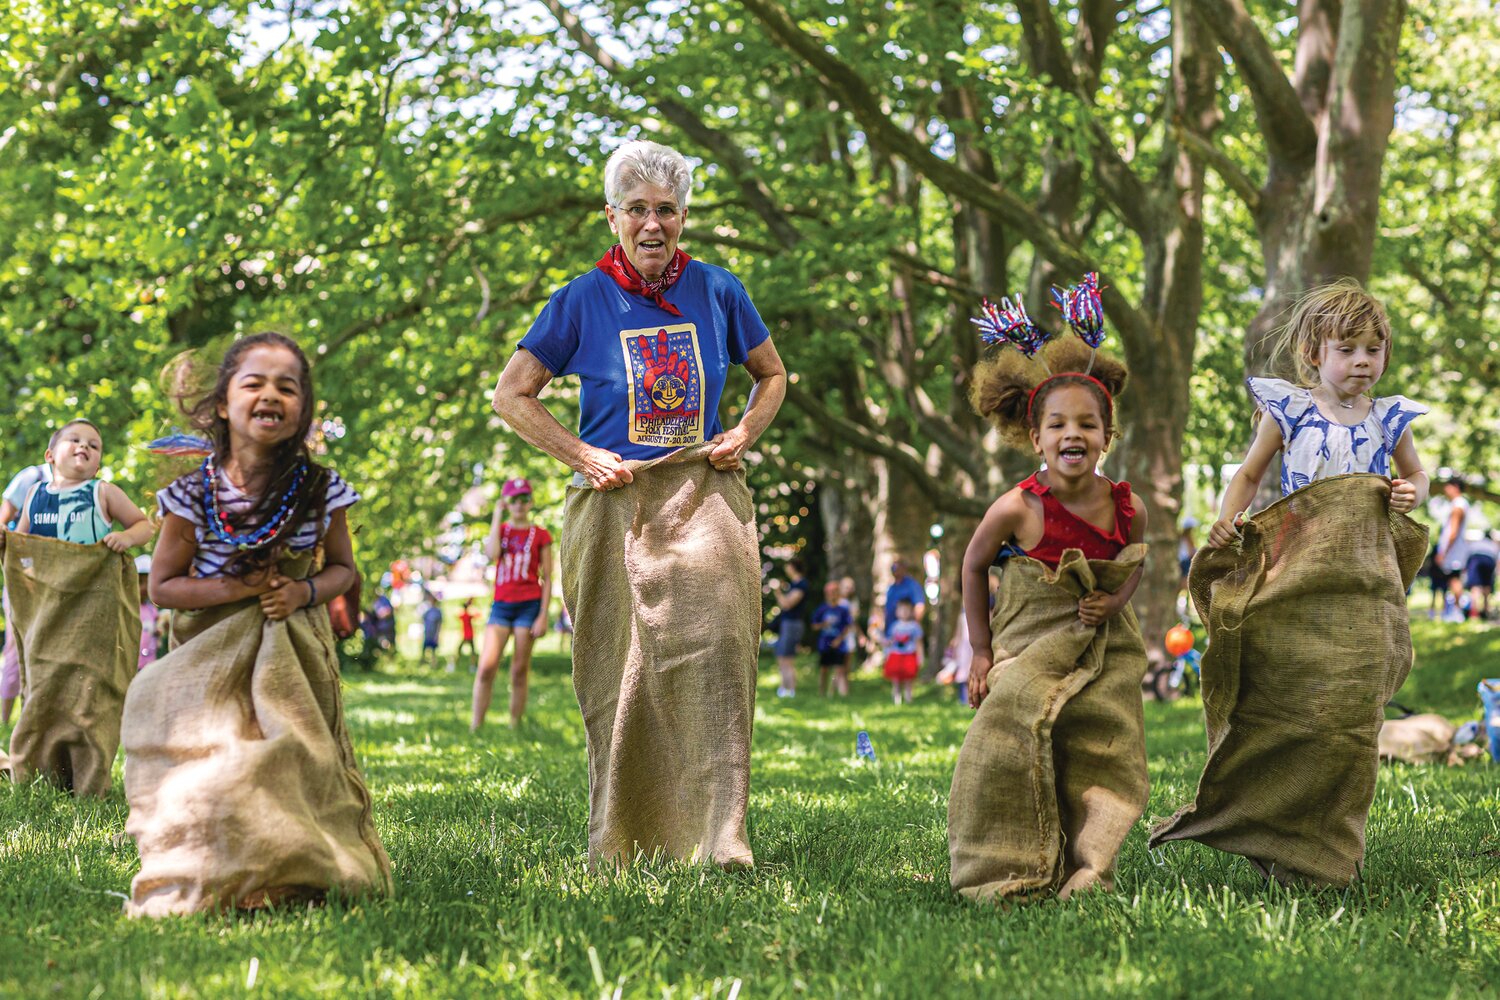 Kids of all ages take part in a sack race at last year’s Fonthill Castle 4th of July celebration.